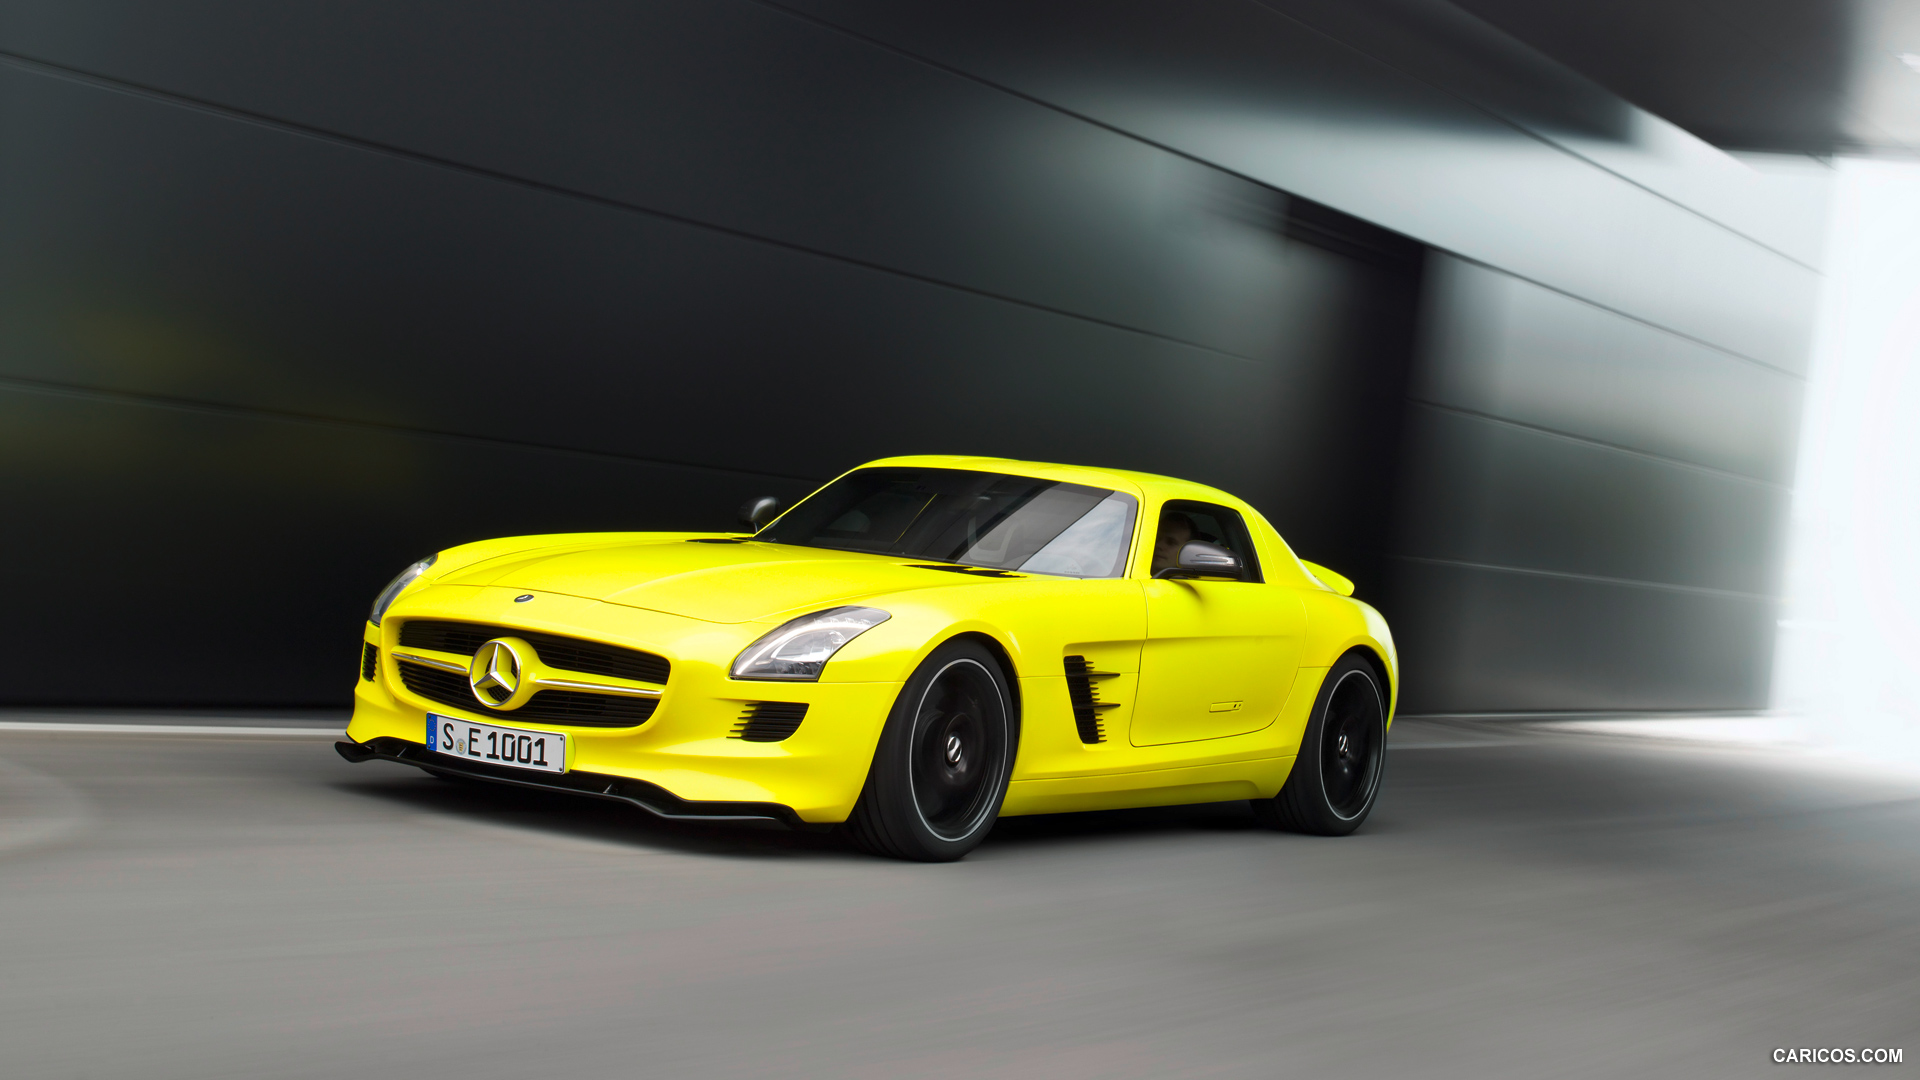 Mercedes-Benz SLS AMG E-CELL Concept  - Front, #51 of 60